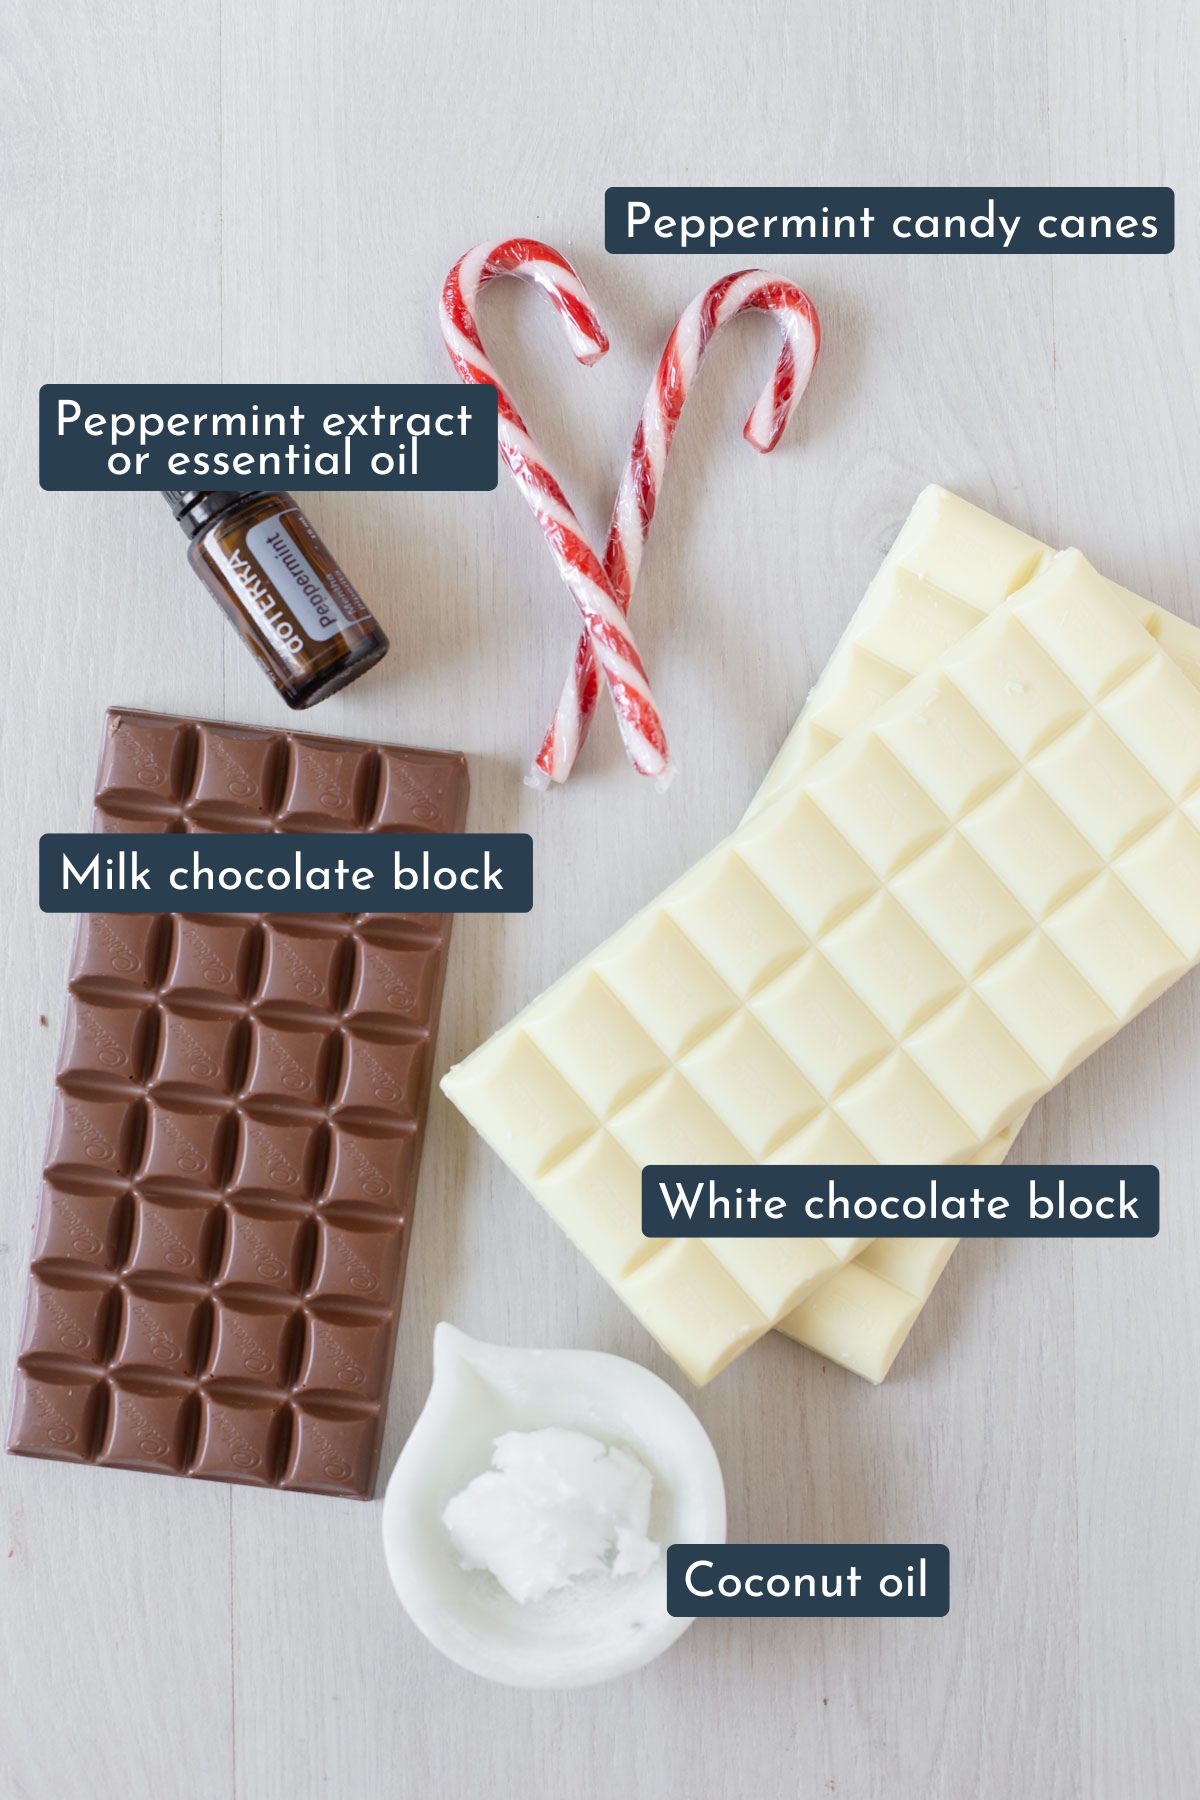 Ingredients to make this chocolate peppermint bark.